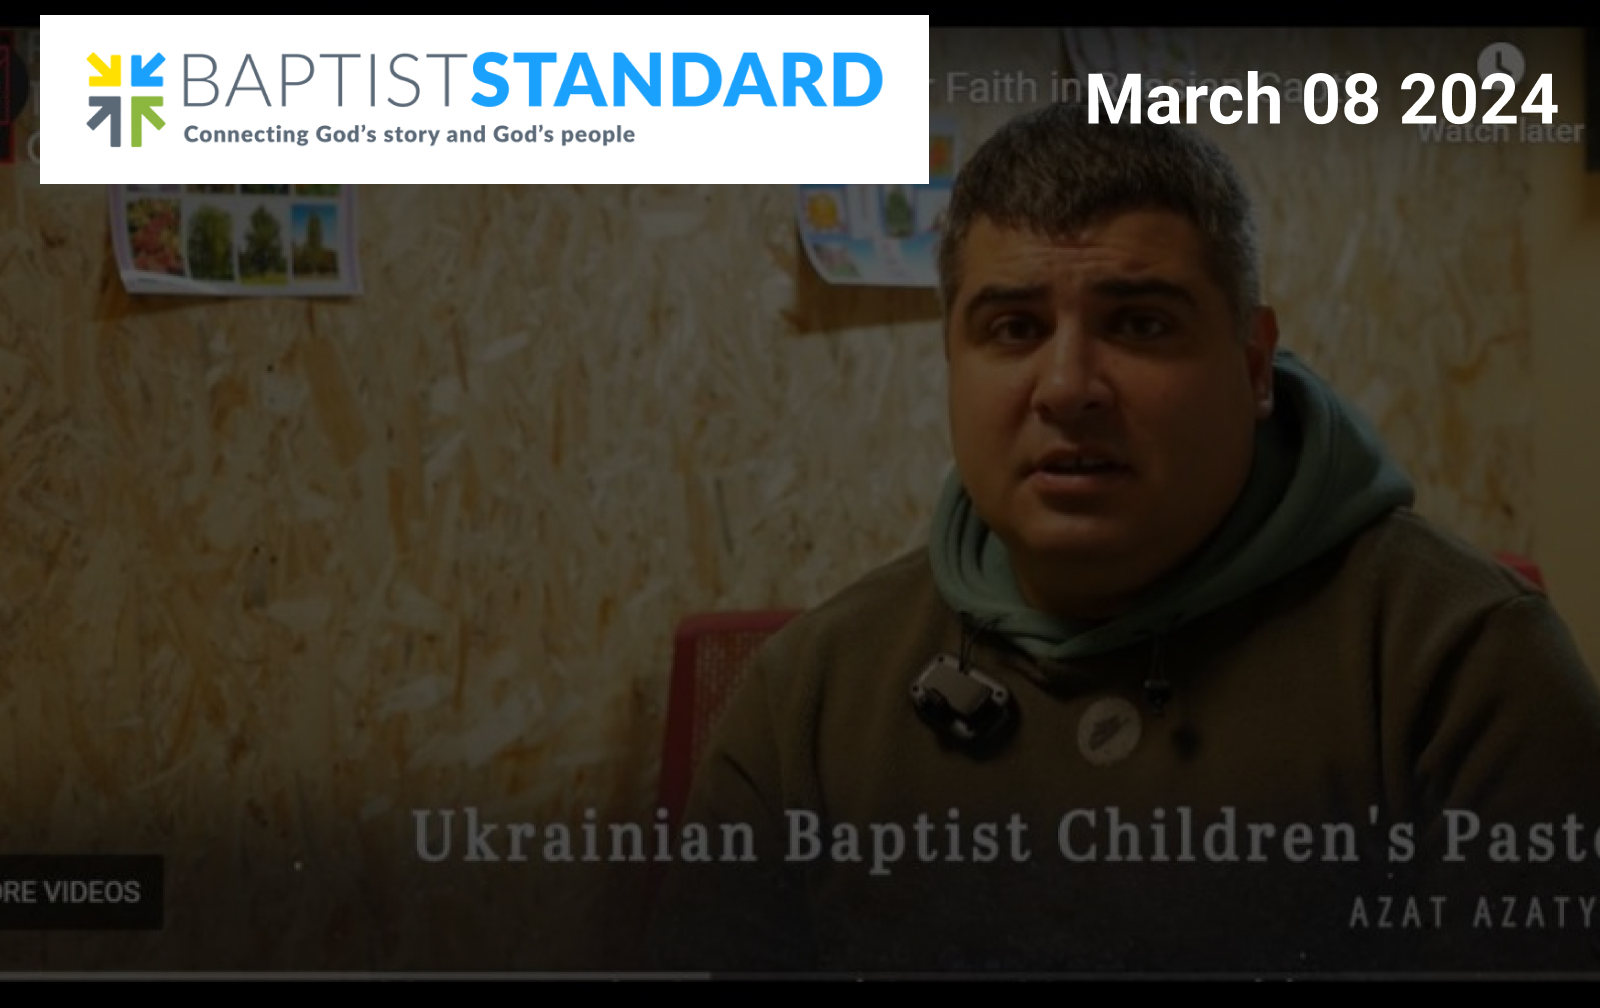 Stories recorded of Ukrainian Christians tortured by Russia